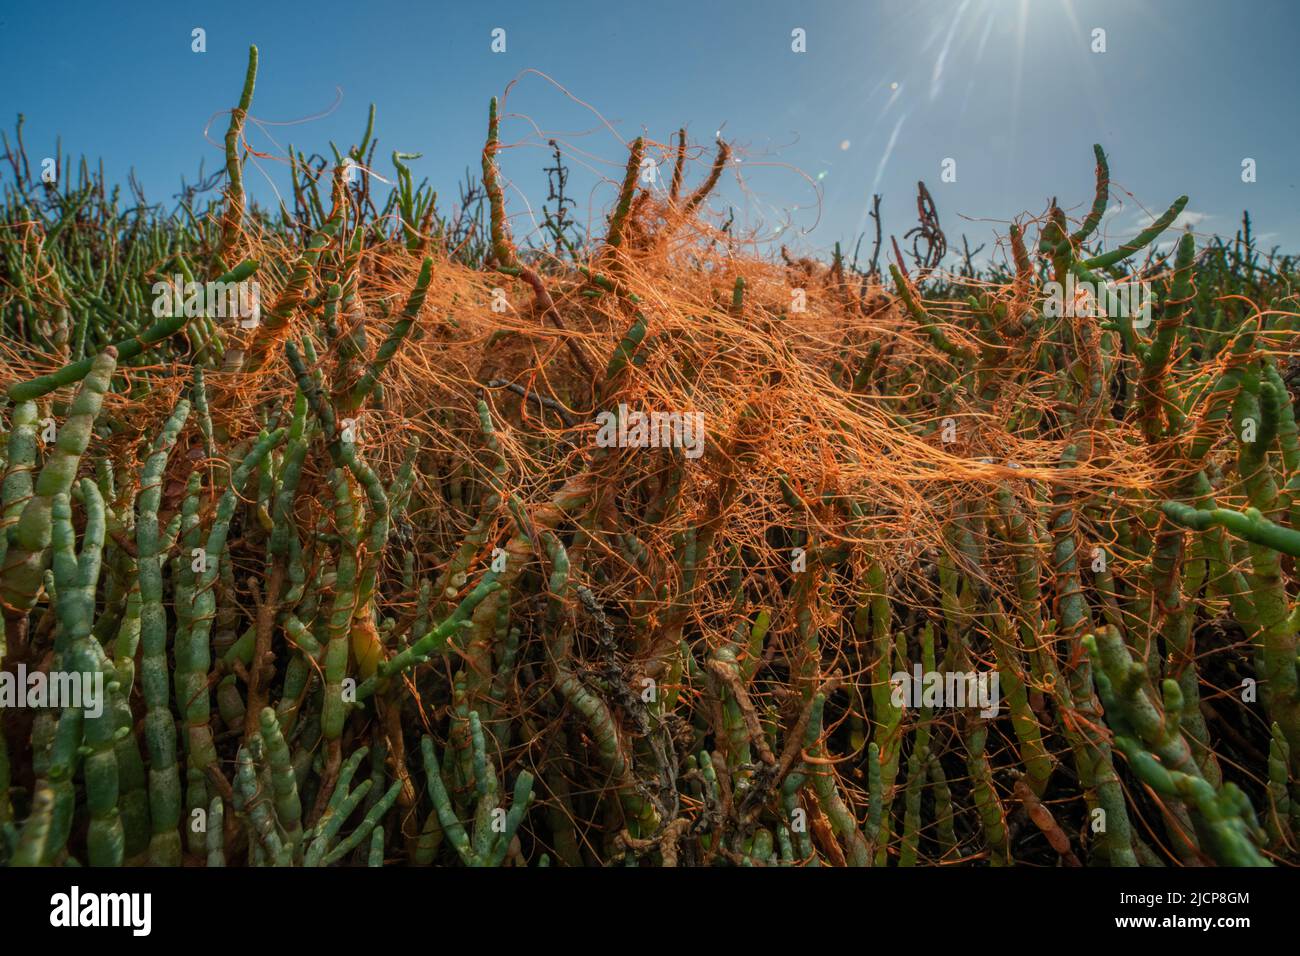 Goldenthread or pacific dodder (Cuscuta pacifica) is a parasitic plant growing on pickleweed (Salicornia) on the Pacific coast of California, USA. Stock Photo